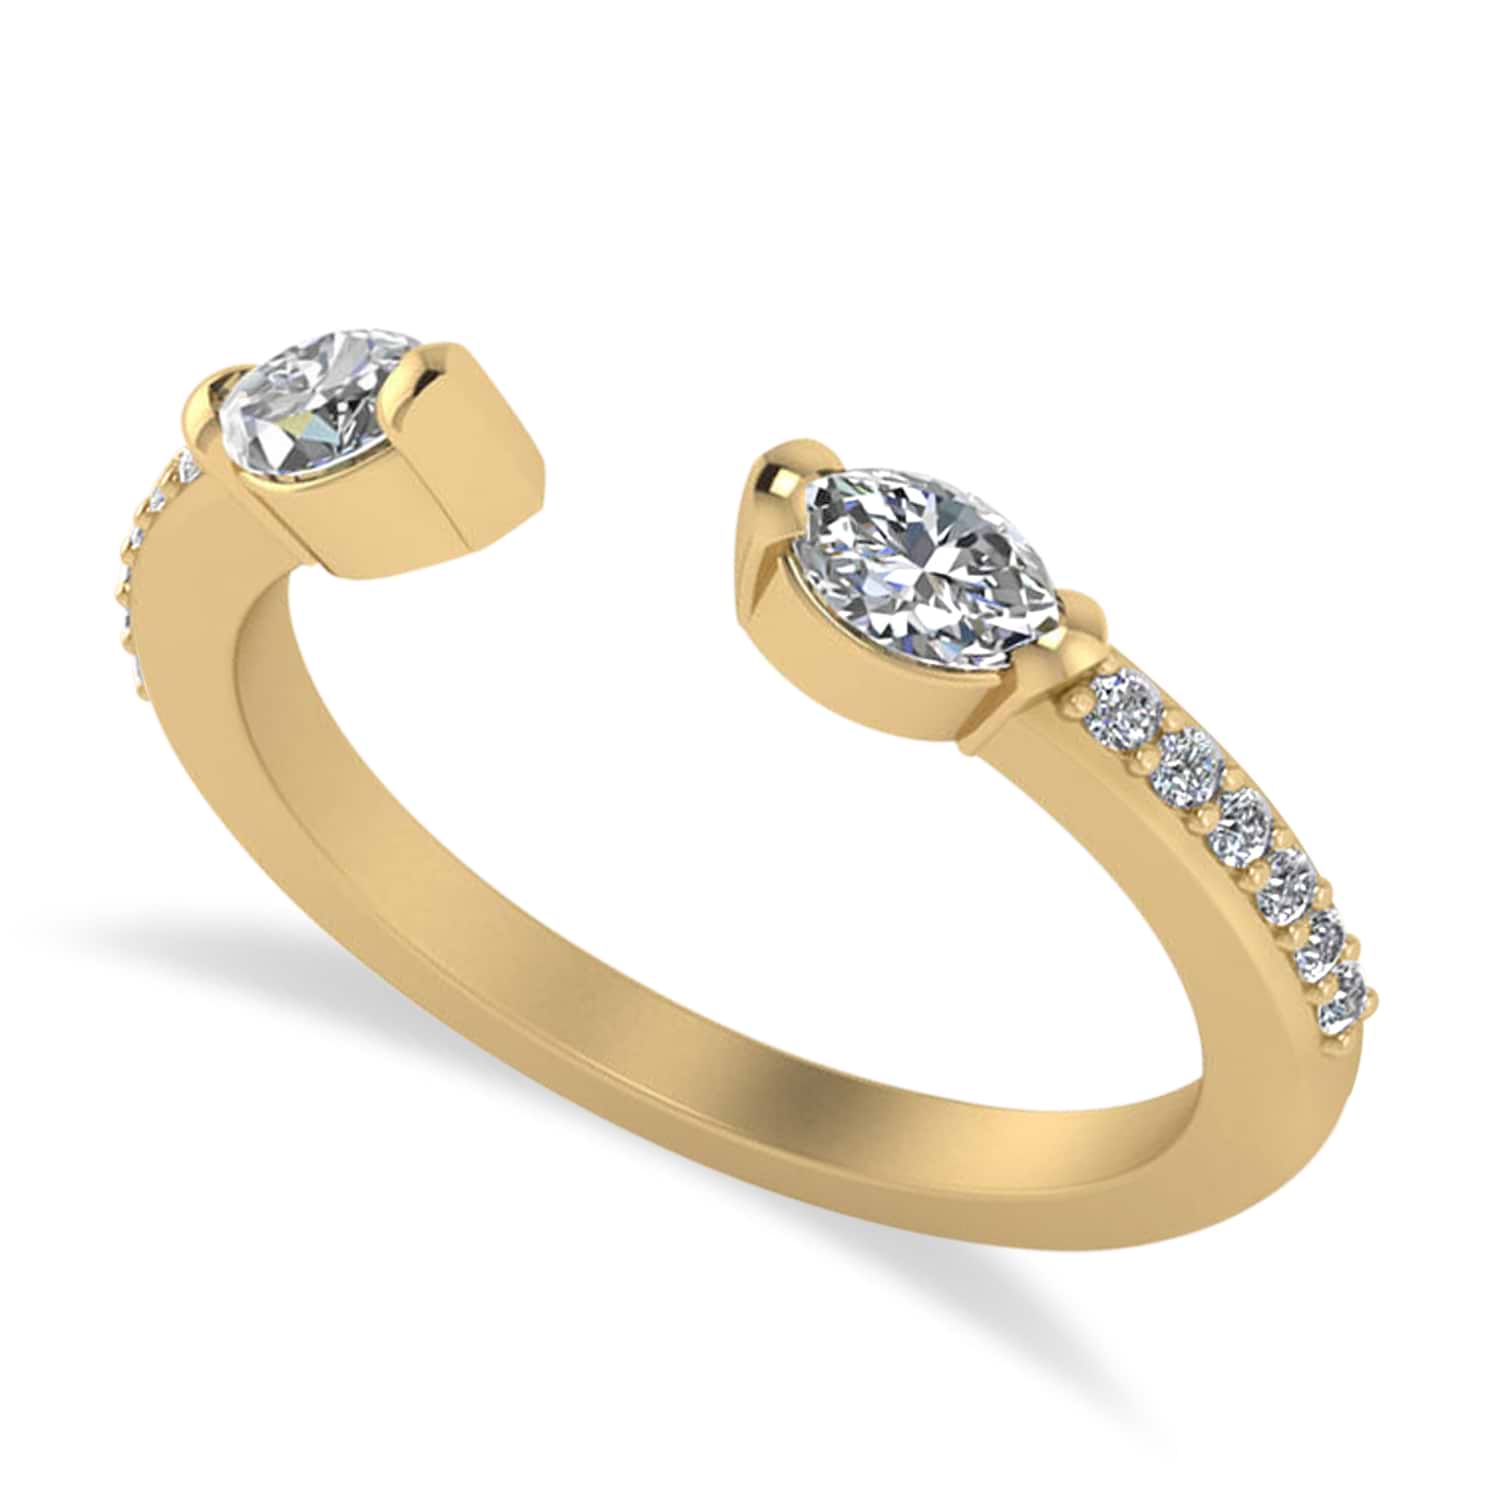 Diamond Open Concept Ring/Band 14k Yellow Gold (0.52ct)